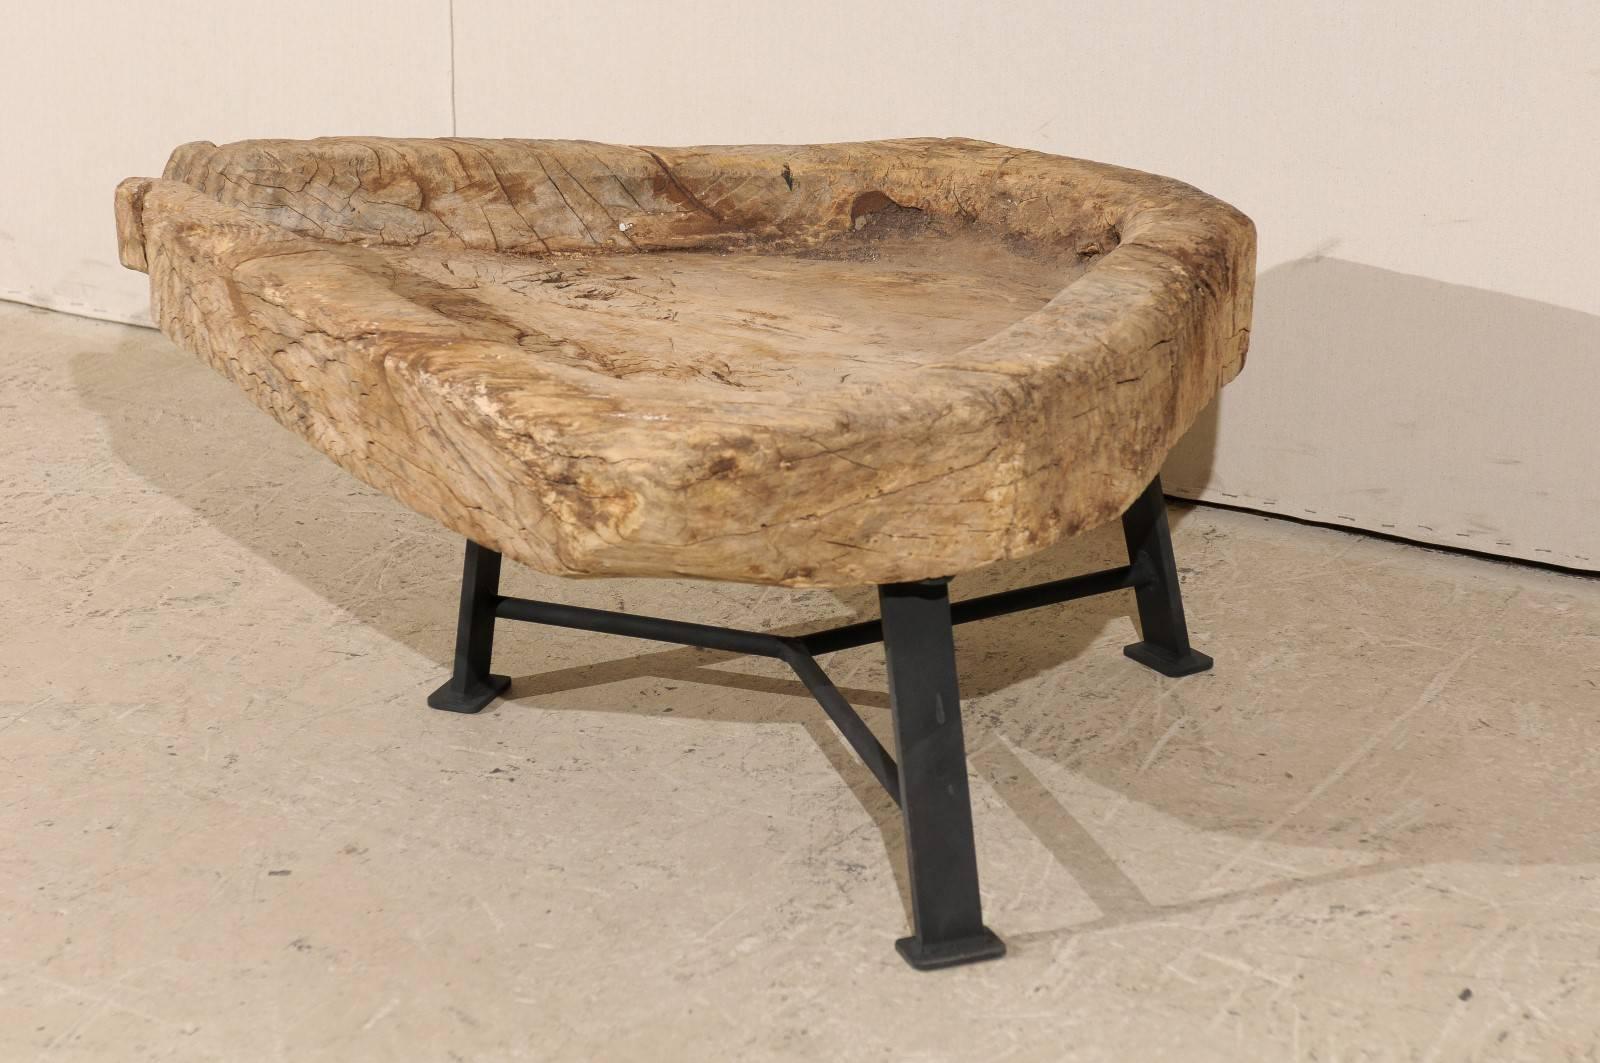 A Guatemalan rustic cheese making table raised on newer custom metal base, from the late 19th, early 20th century. This antique wooden cheese making table originally used in Guatemala has a new custom metal Stand and thus, new purpose. This old